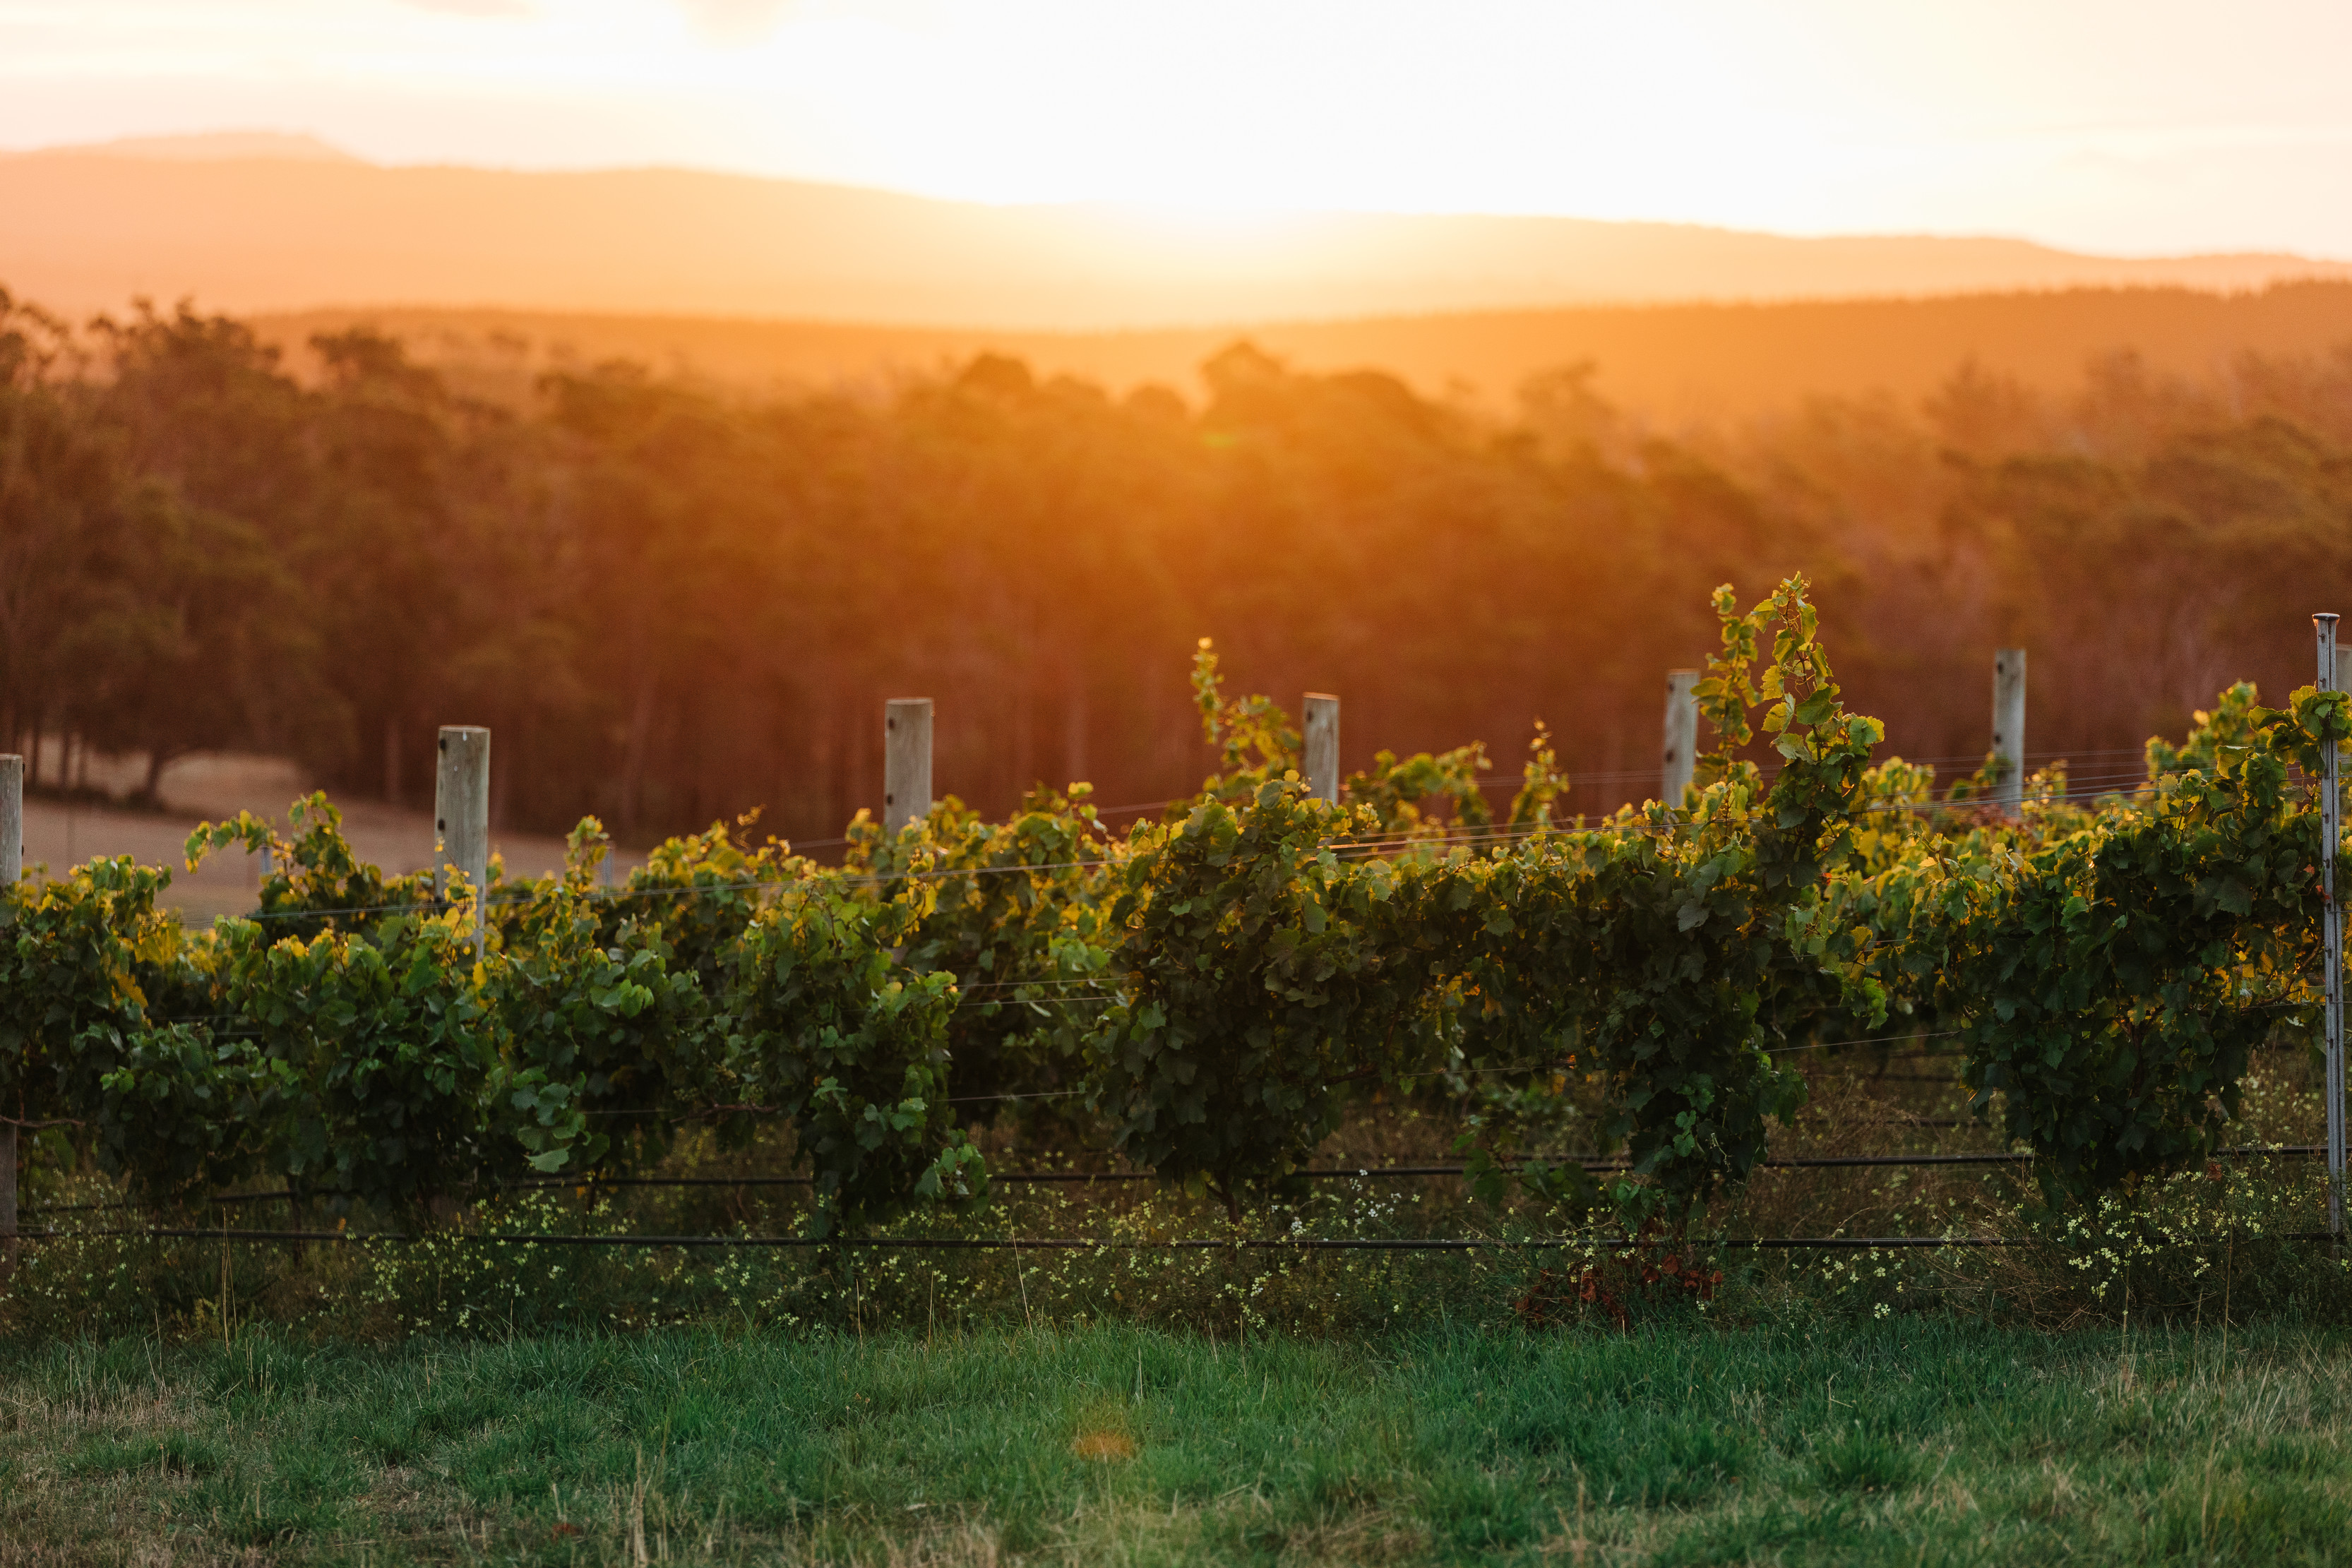 The sun shines brightly over Delamere Vineyards.